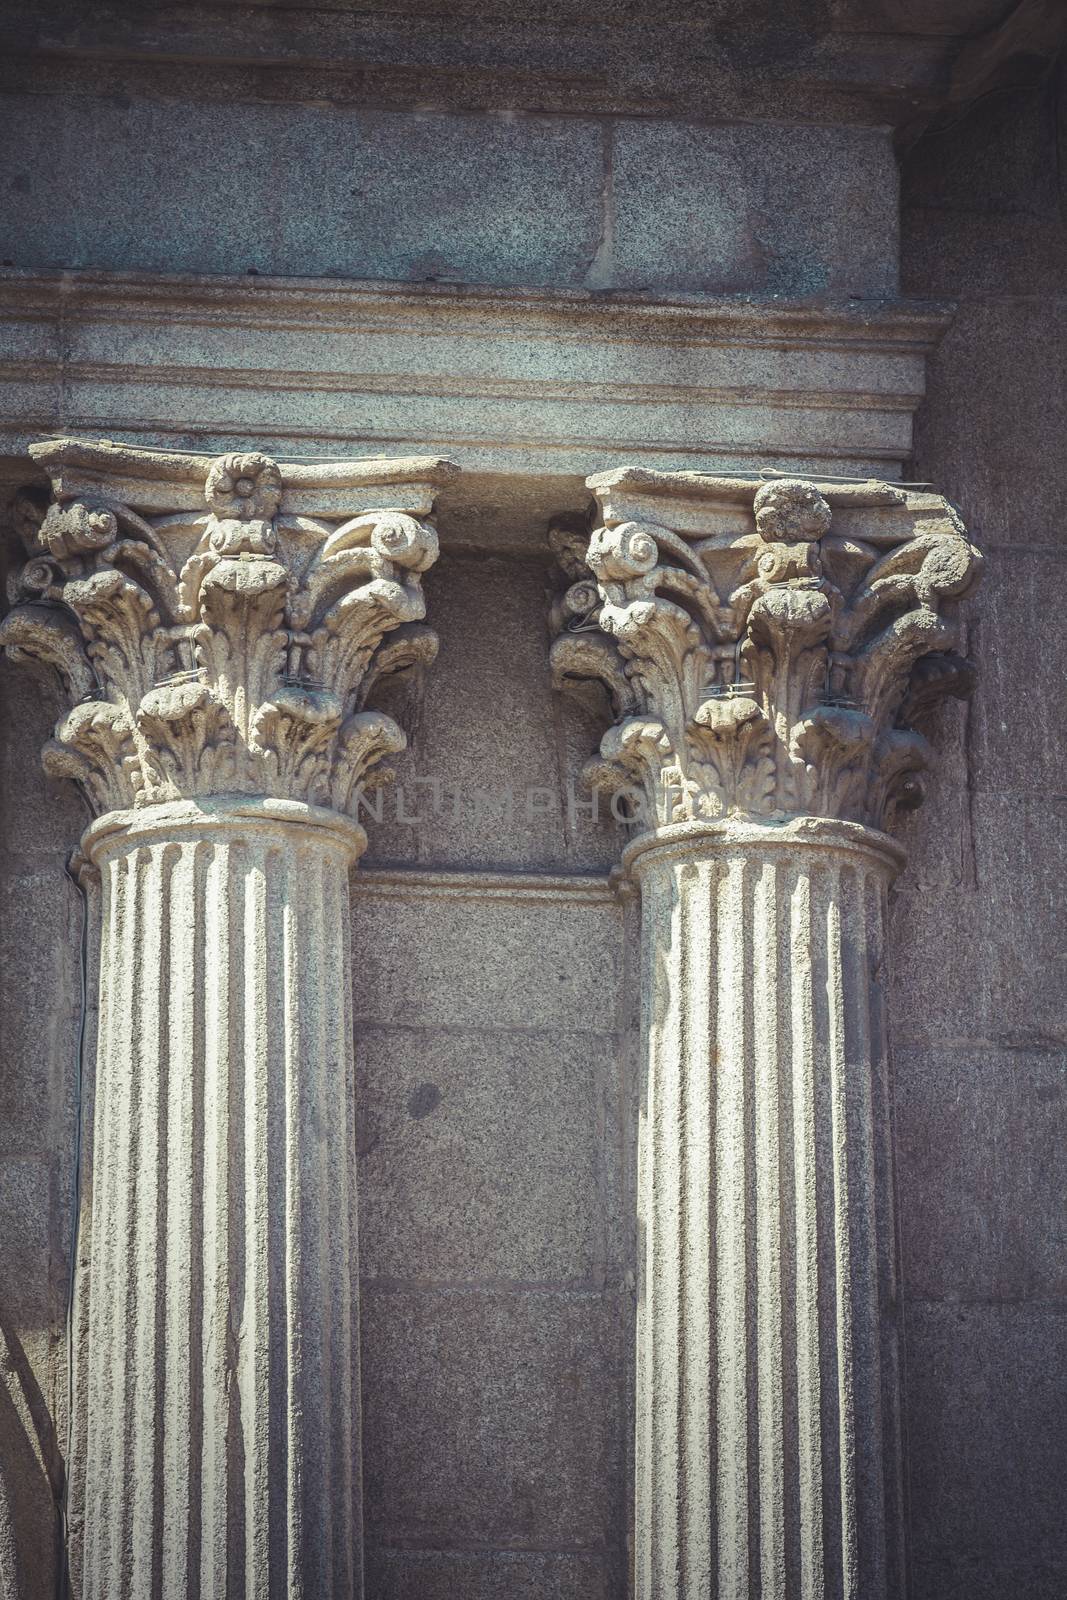 Temple, Corinthian capitals, stone columns in old building in Spain